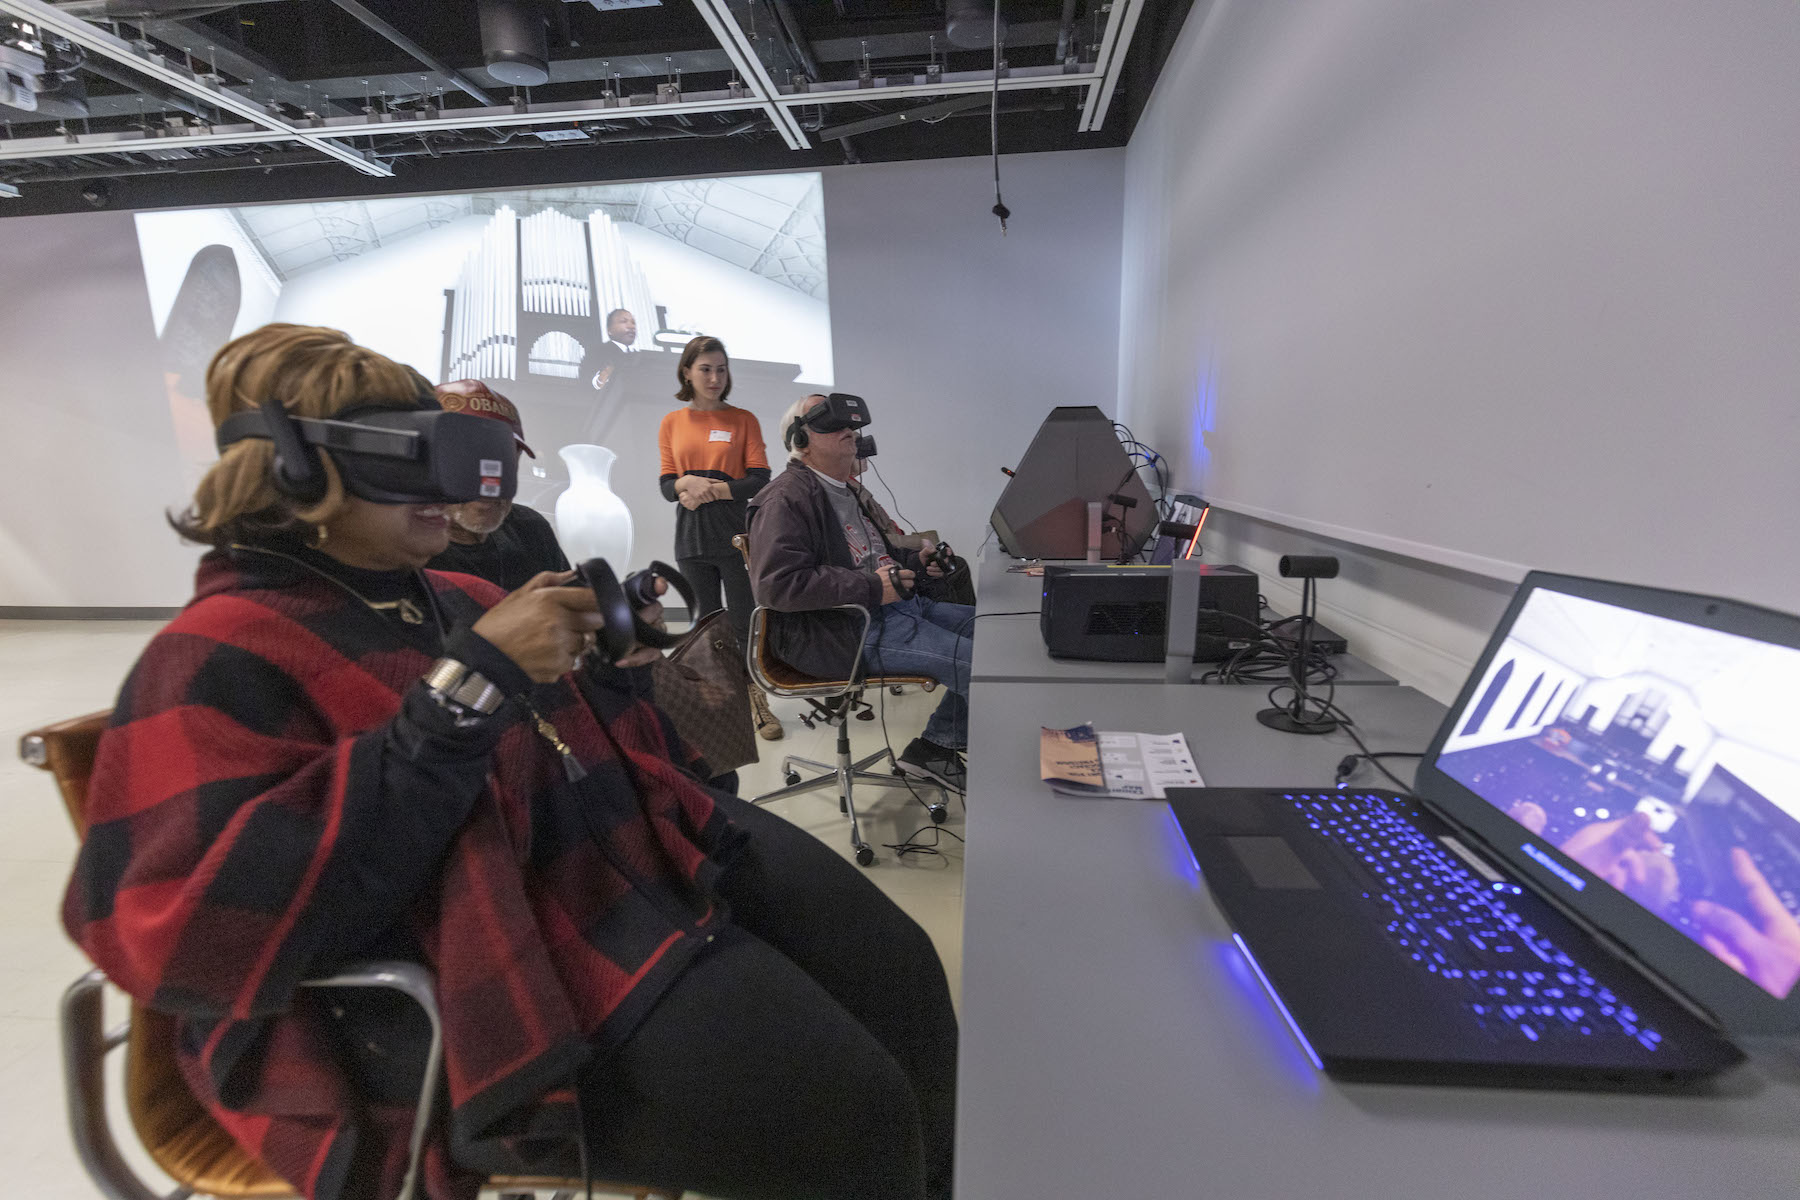 A person in a red coat wearing a VR headset